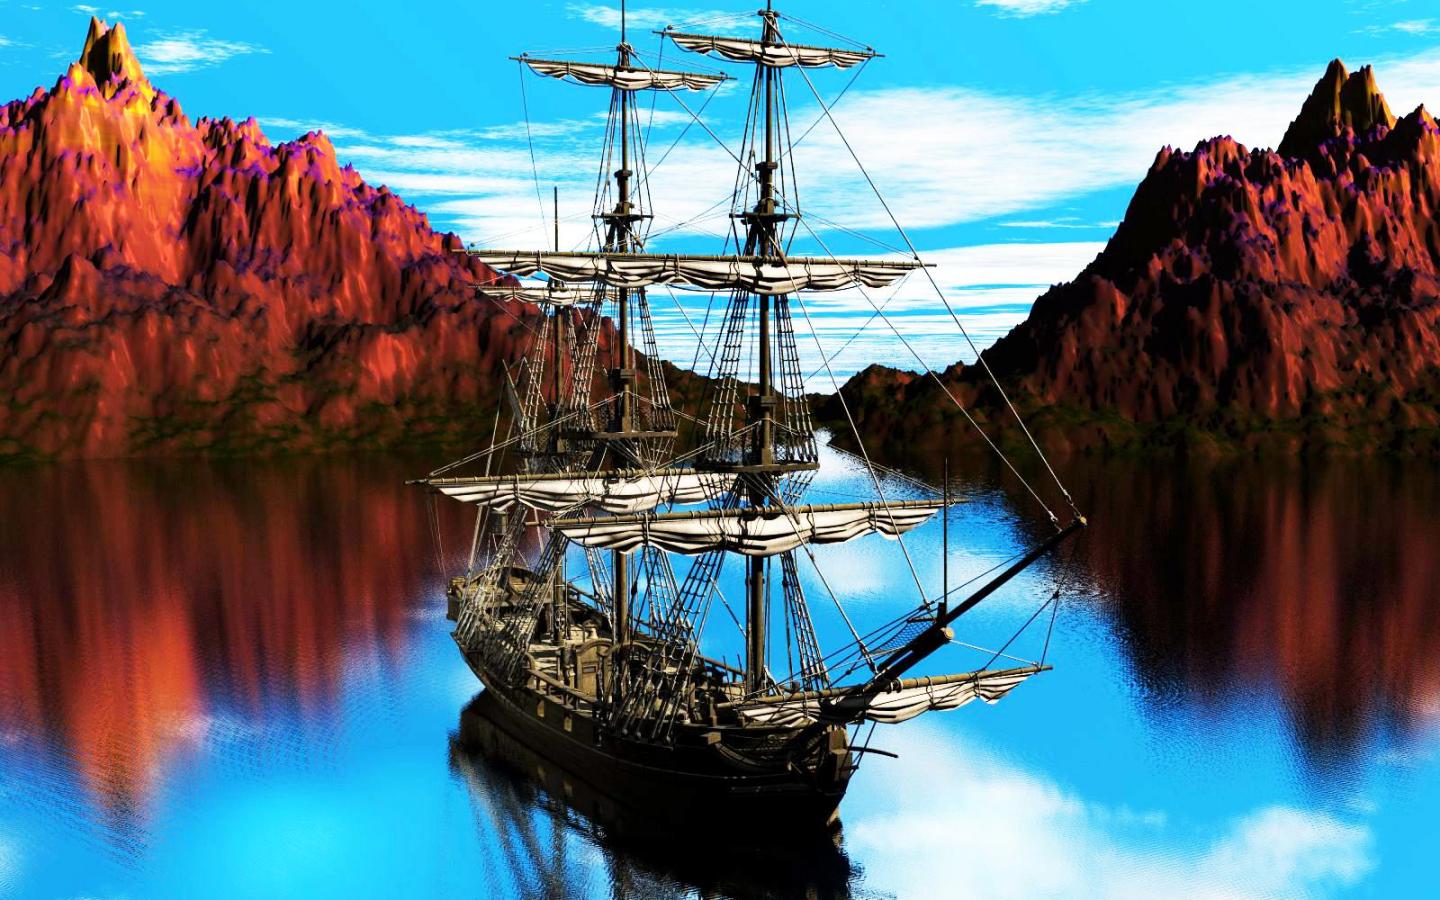 THE OLD PIRATE SHIP WALLPAPER   110500   HD Wallpapers